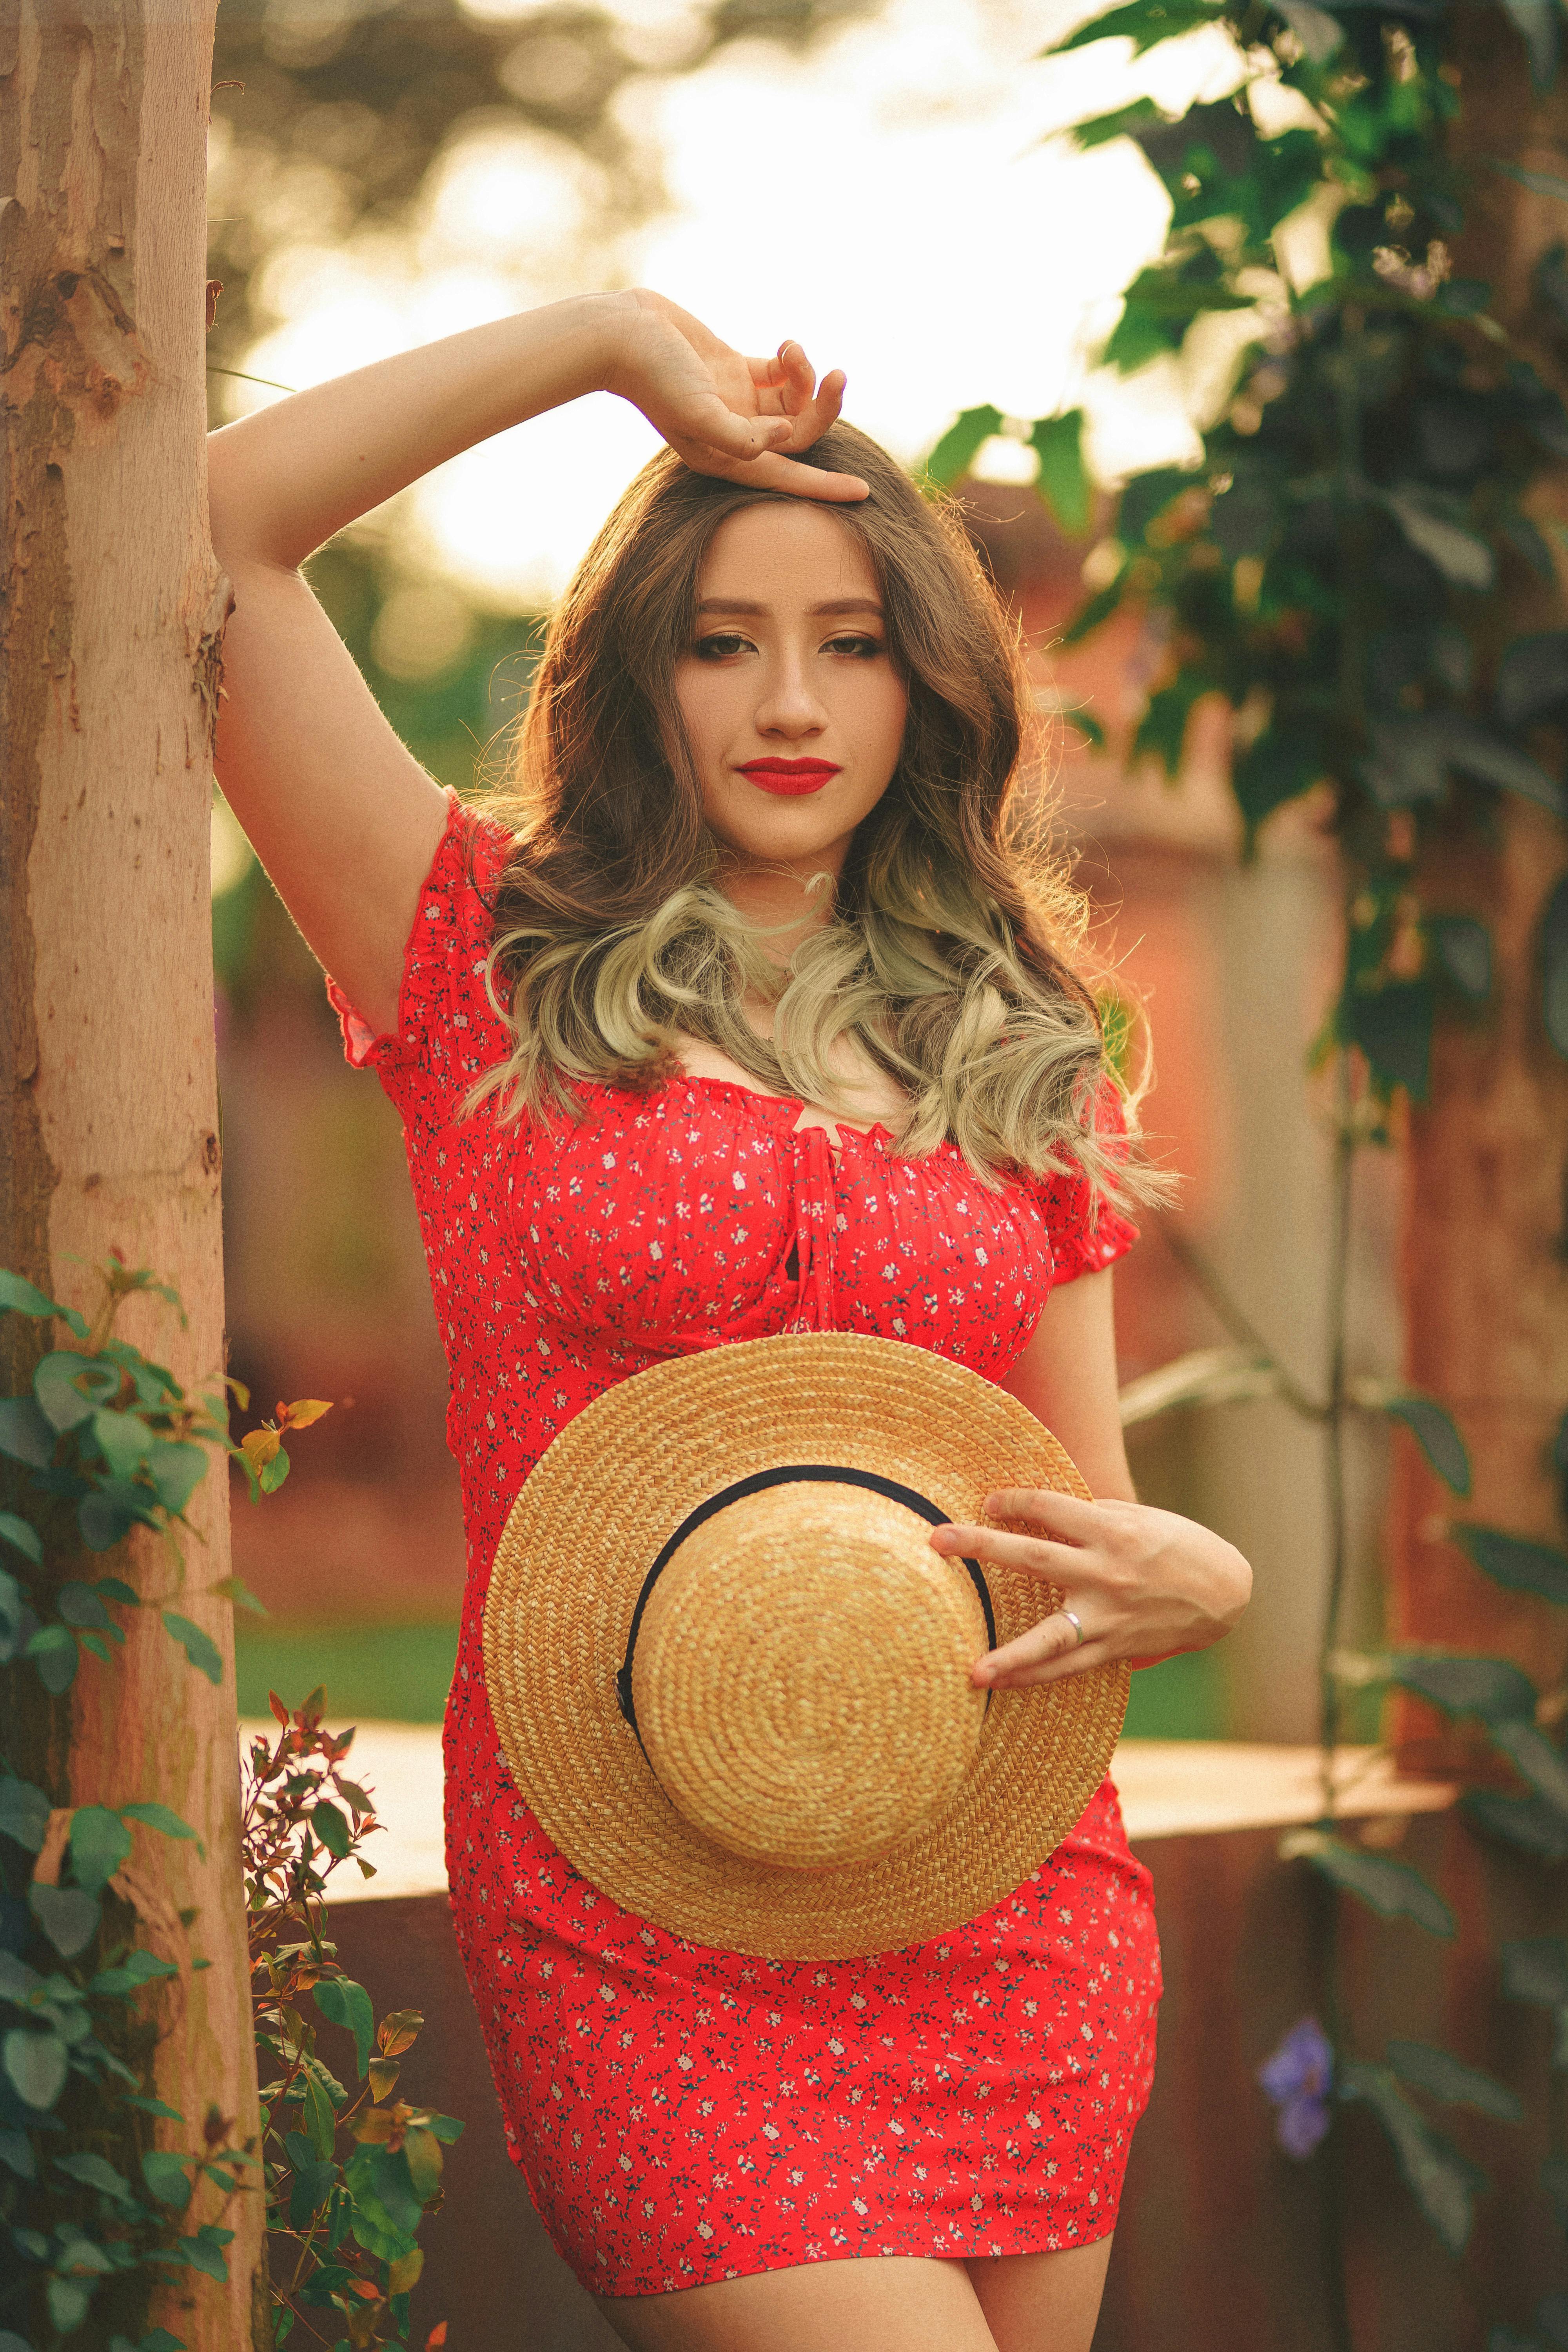 Woman in Red Dress Holding a Large Sun Hat · Free Stock Photo